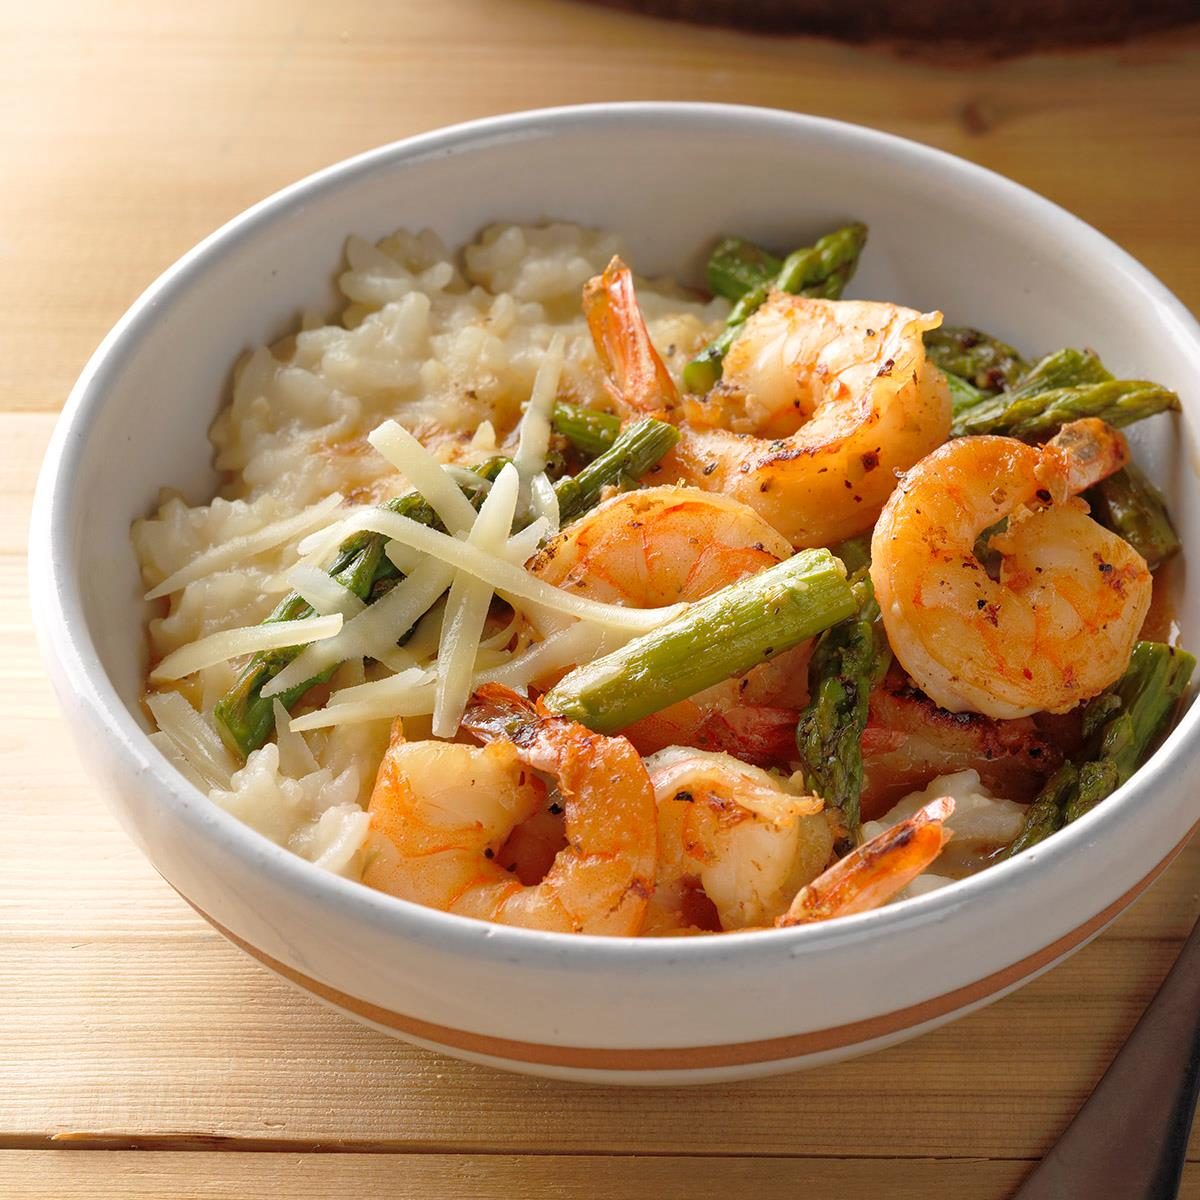 Pressure Cooked Shrimp And Asparagus Risotto Exps Tham18 206558 B10 09 1b 18